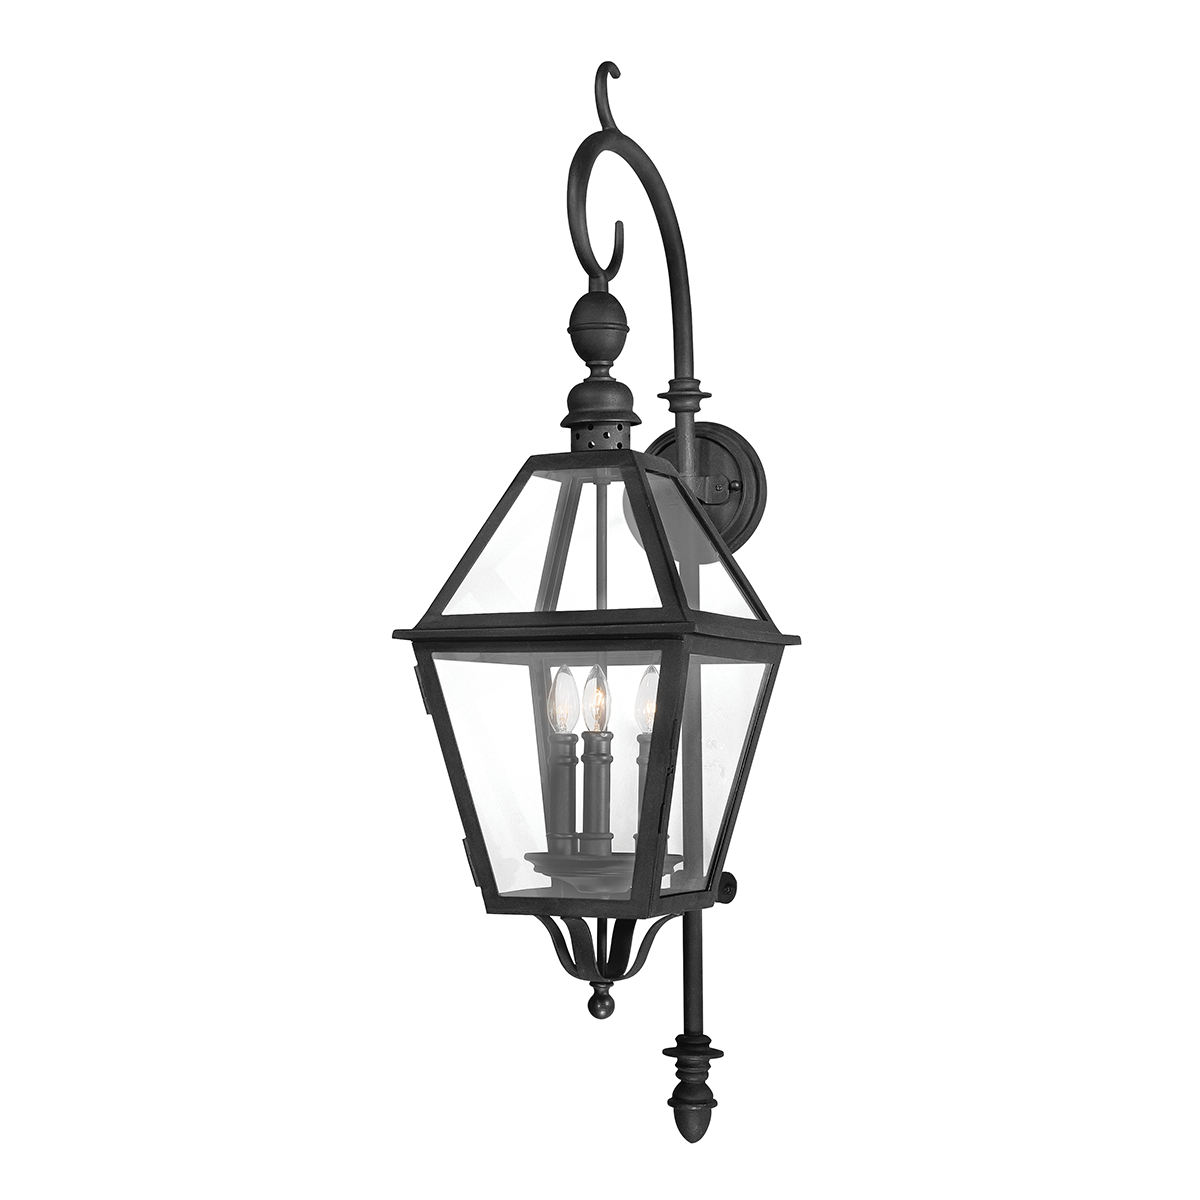 Troy Lighting TOWNSEND 3LT WALL LANTERN LARGE B9622 Outdoor l Wall Troy Lighting NATURAL BRONZE  